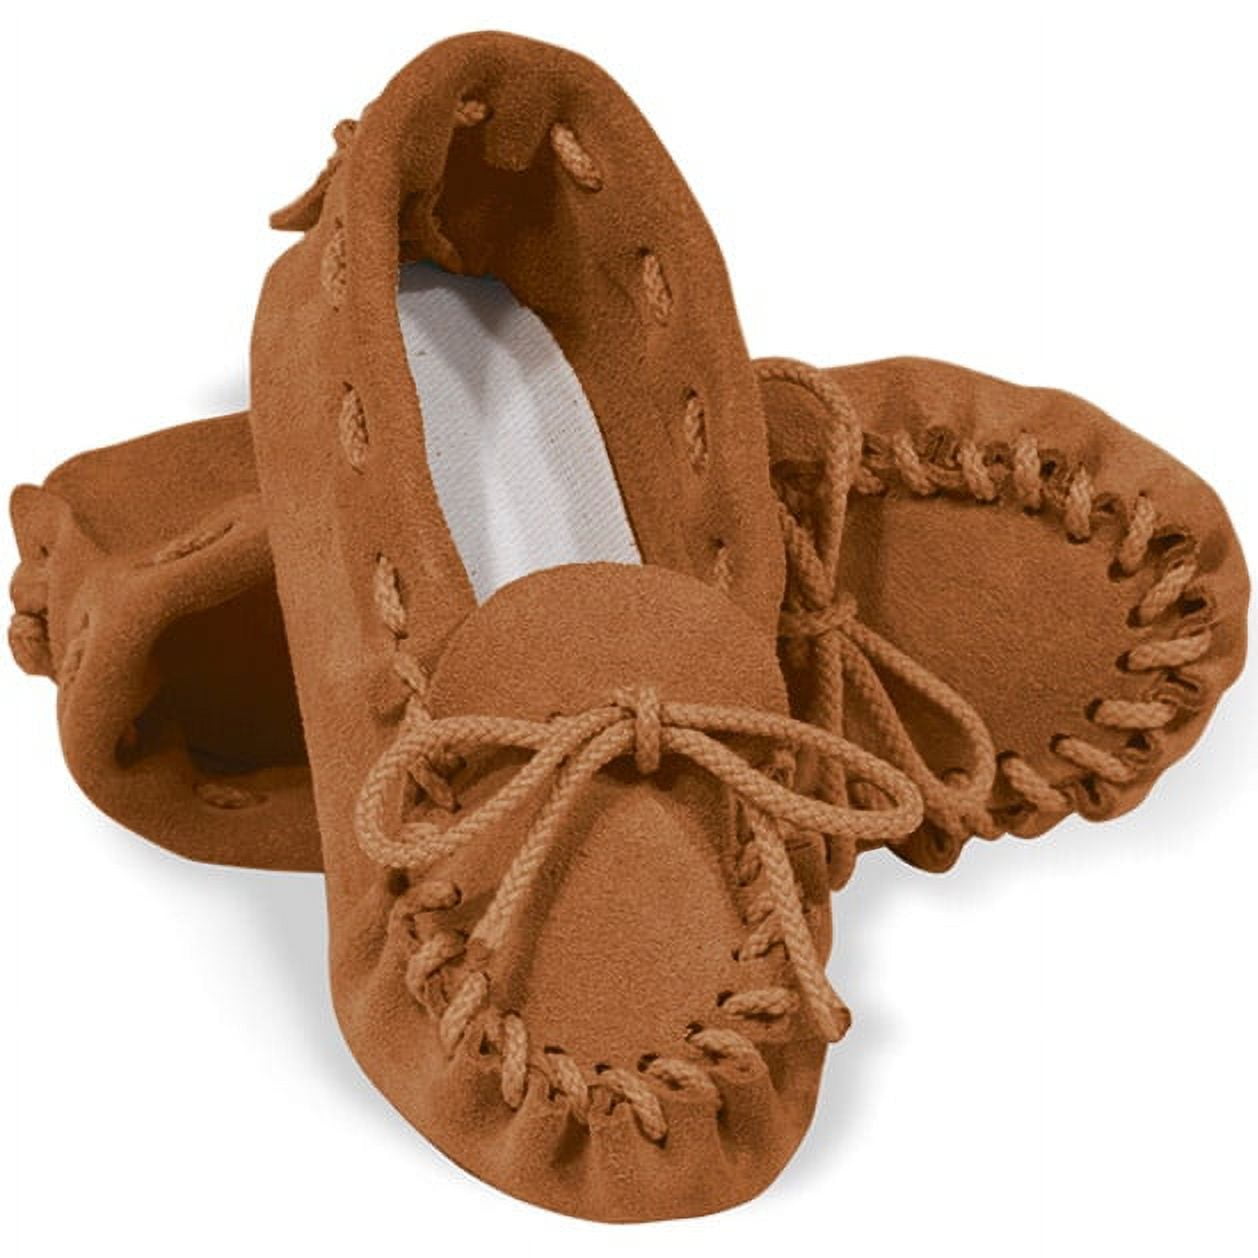 Moccasin Tandy Leather Kit House Shoe Women 10.5 to 11 Stiff